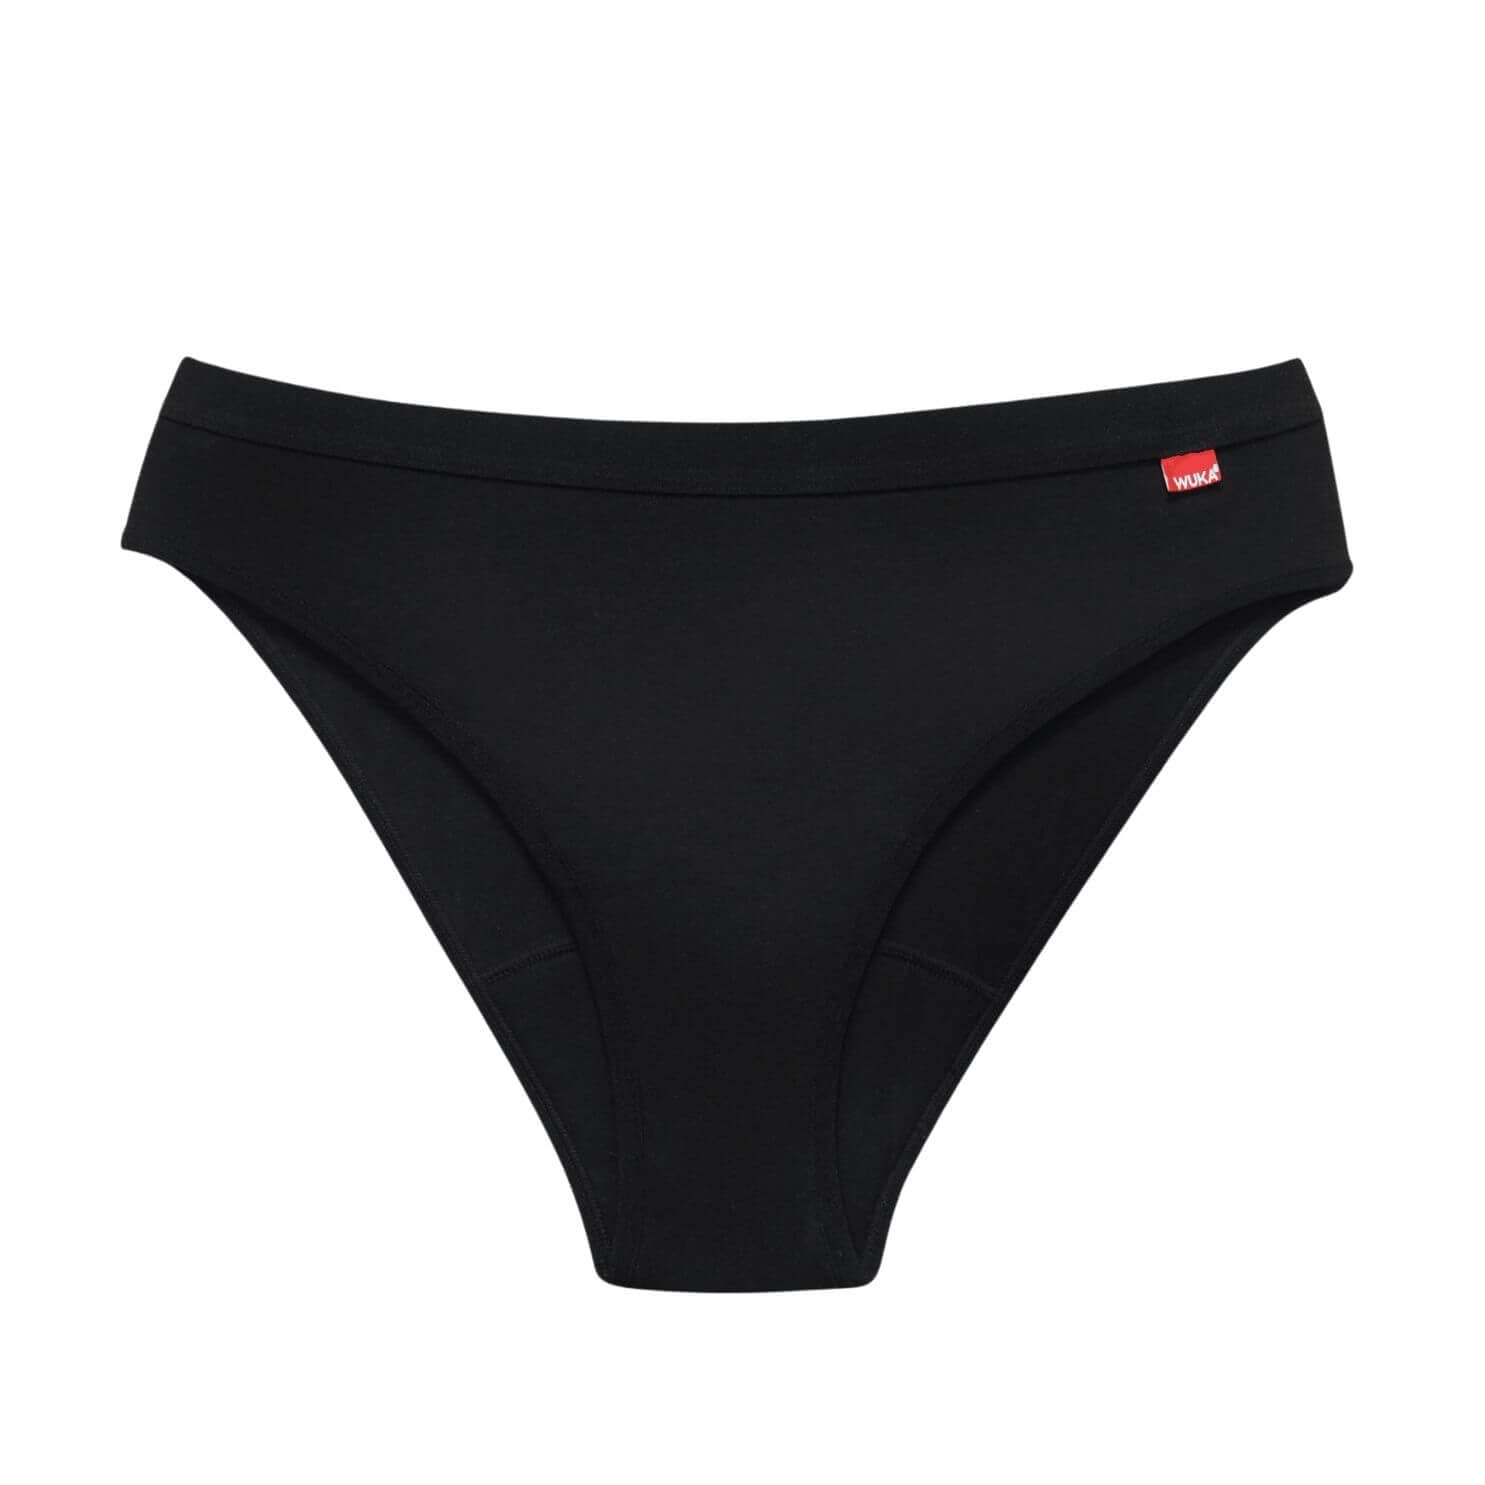 Subset Organic Cotton High-Rise Thong: Available in sizes 2XS-4XL